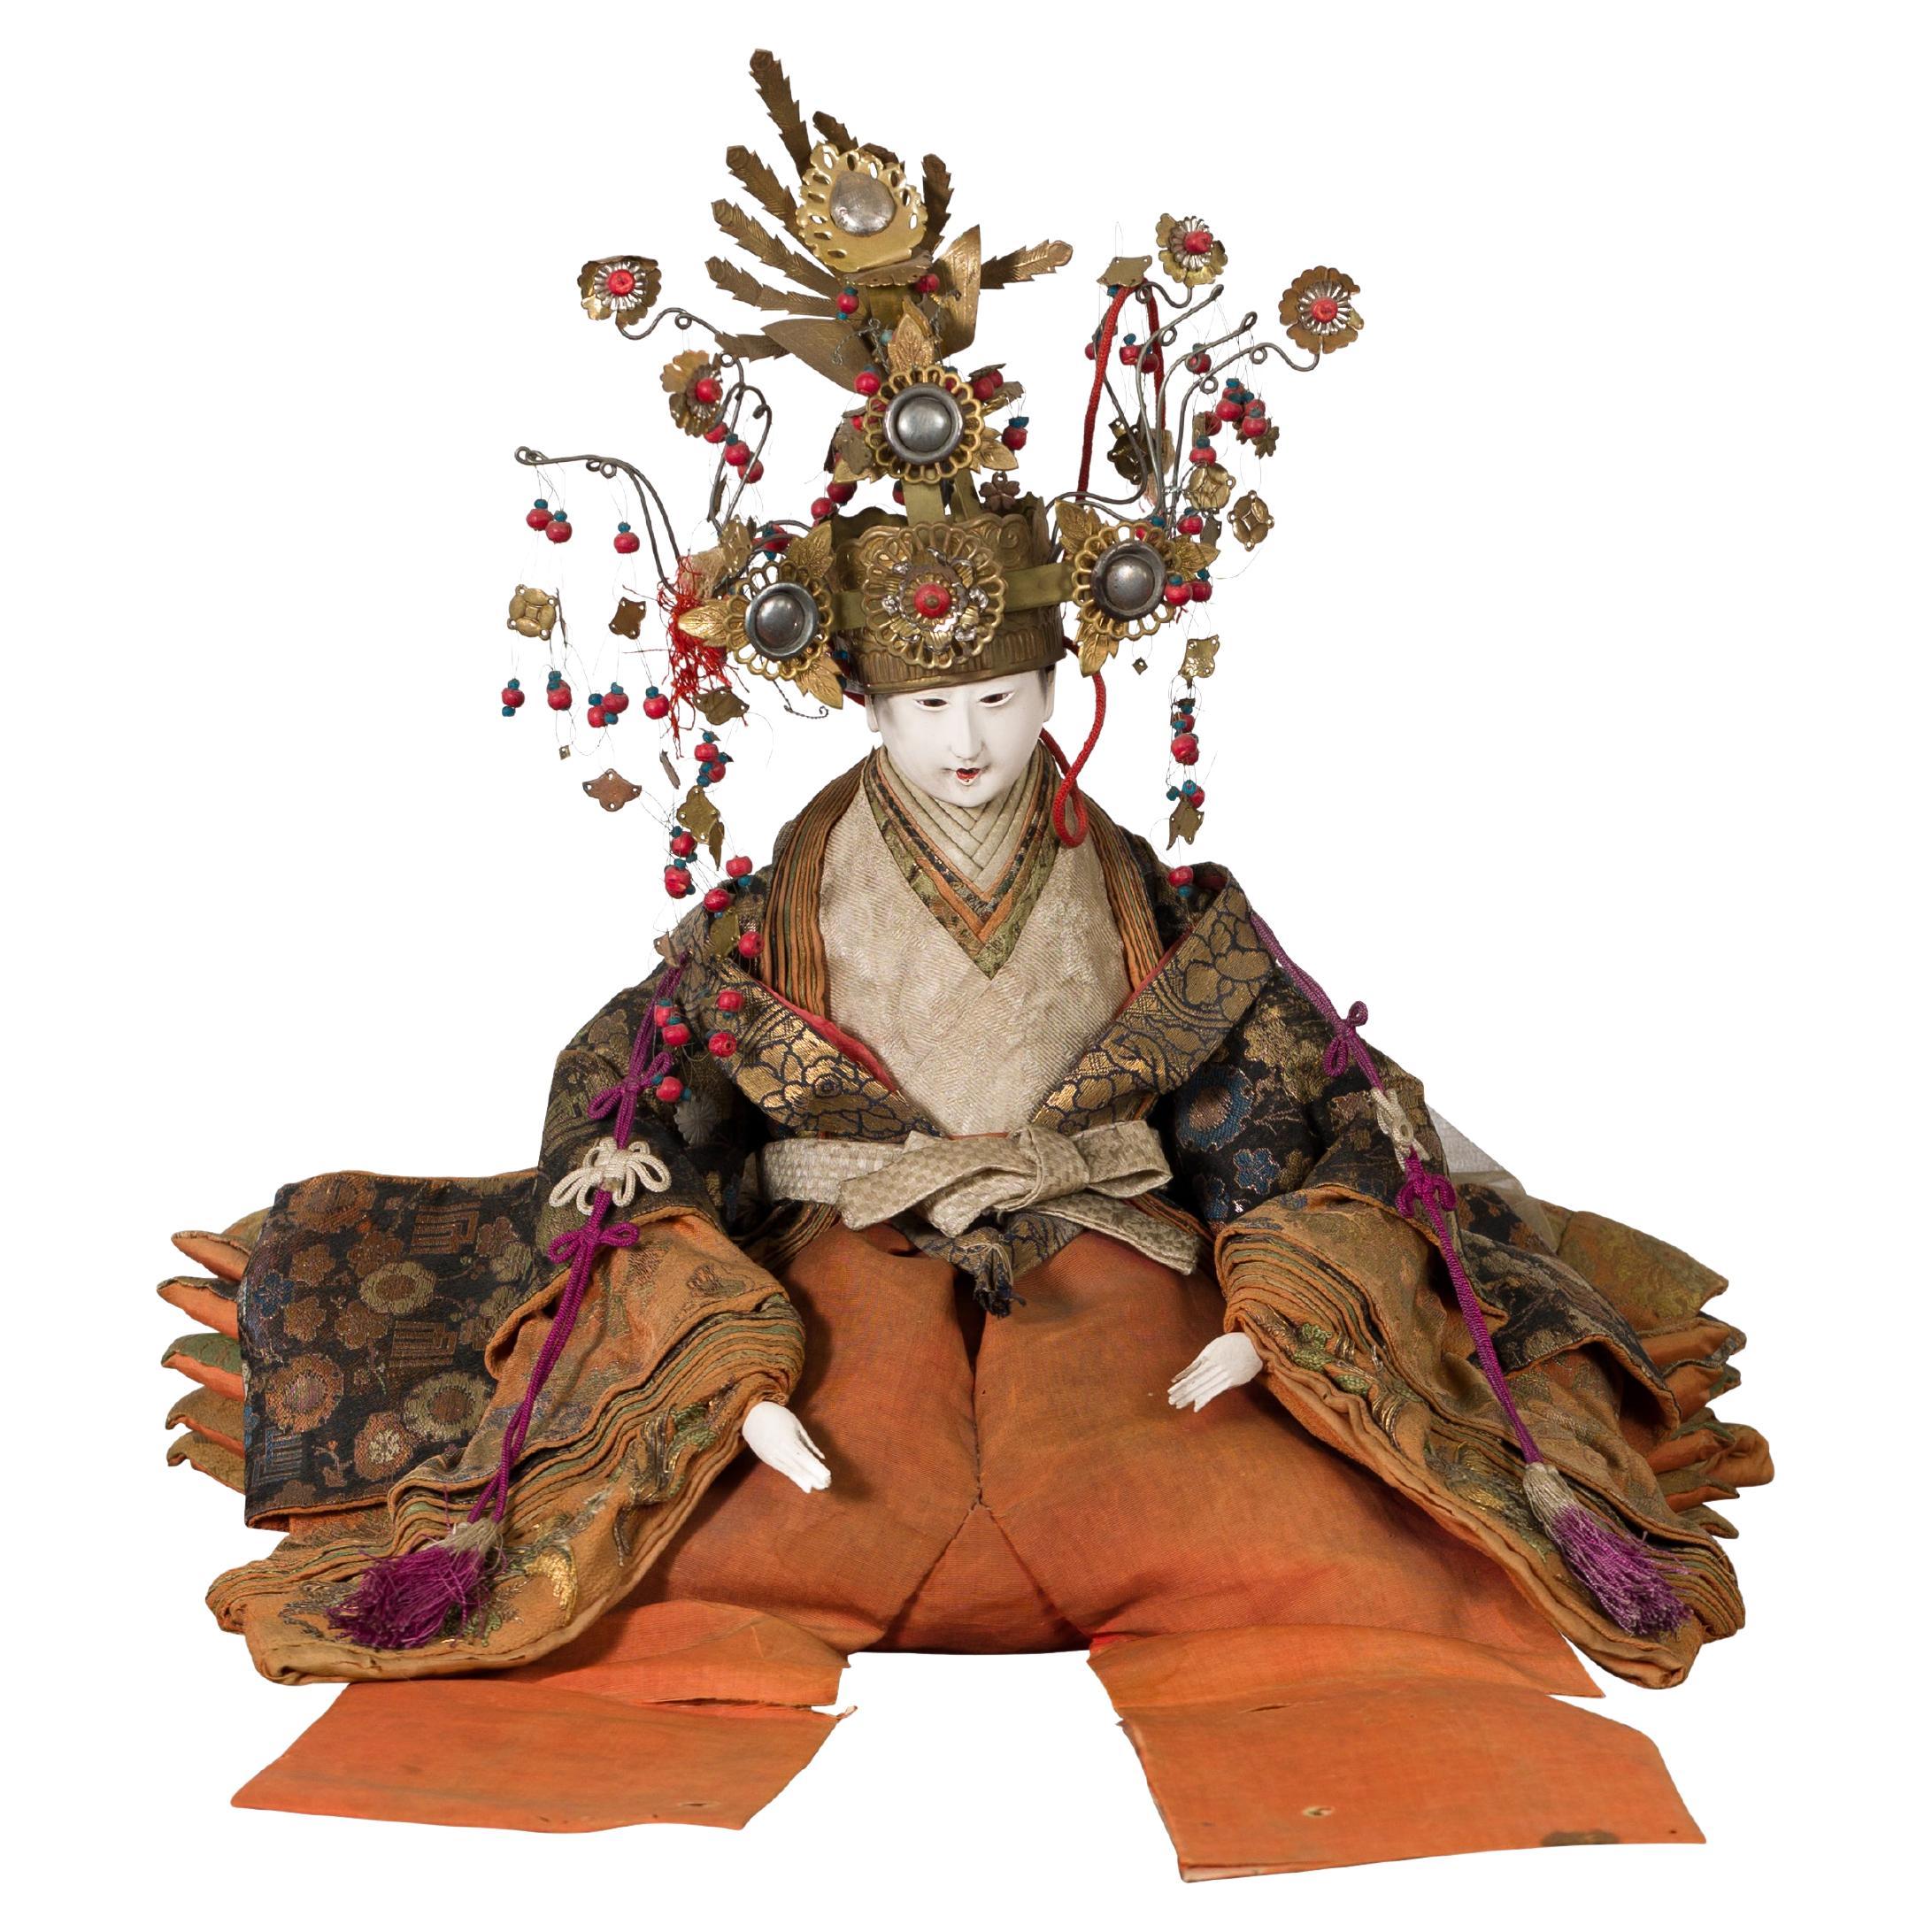 Japanese Taisho Period Sitting Doll with Silk Clothing and Ornate Headdress For Sale